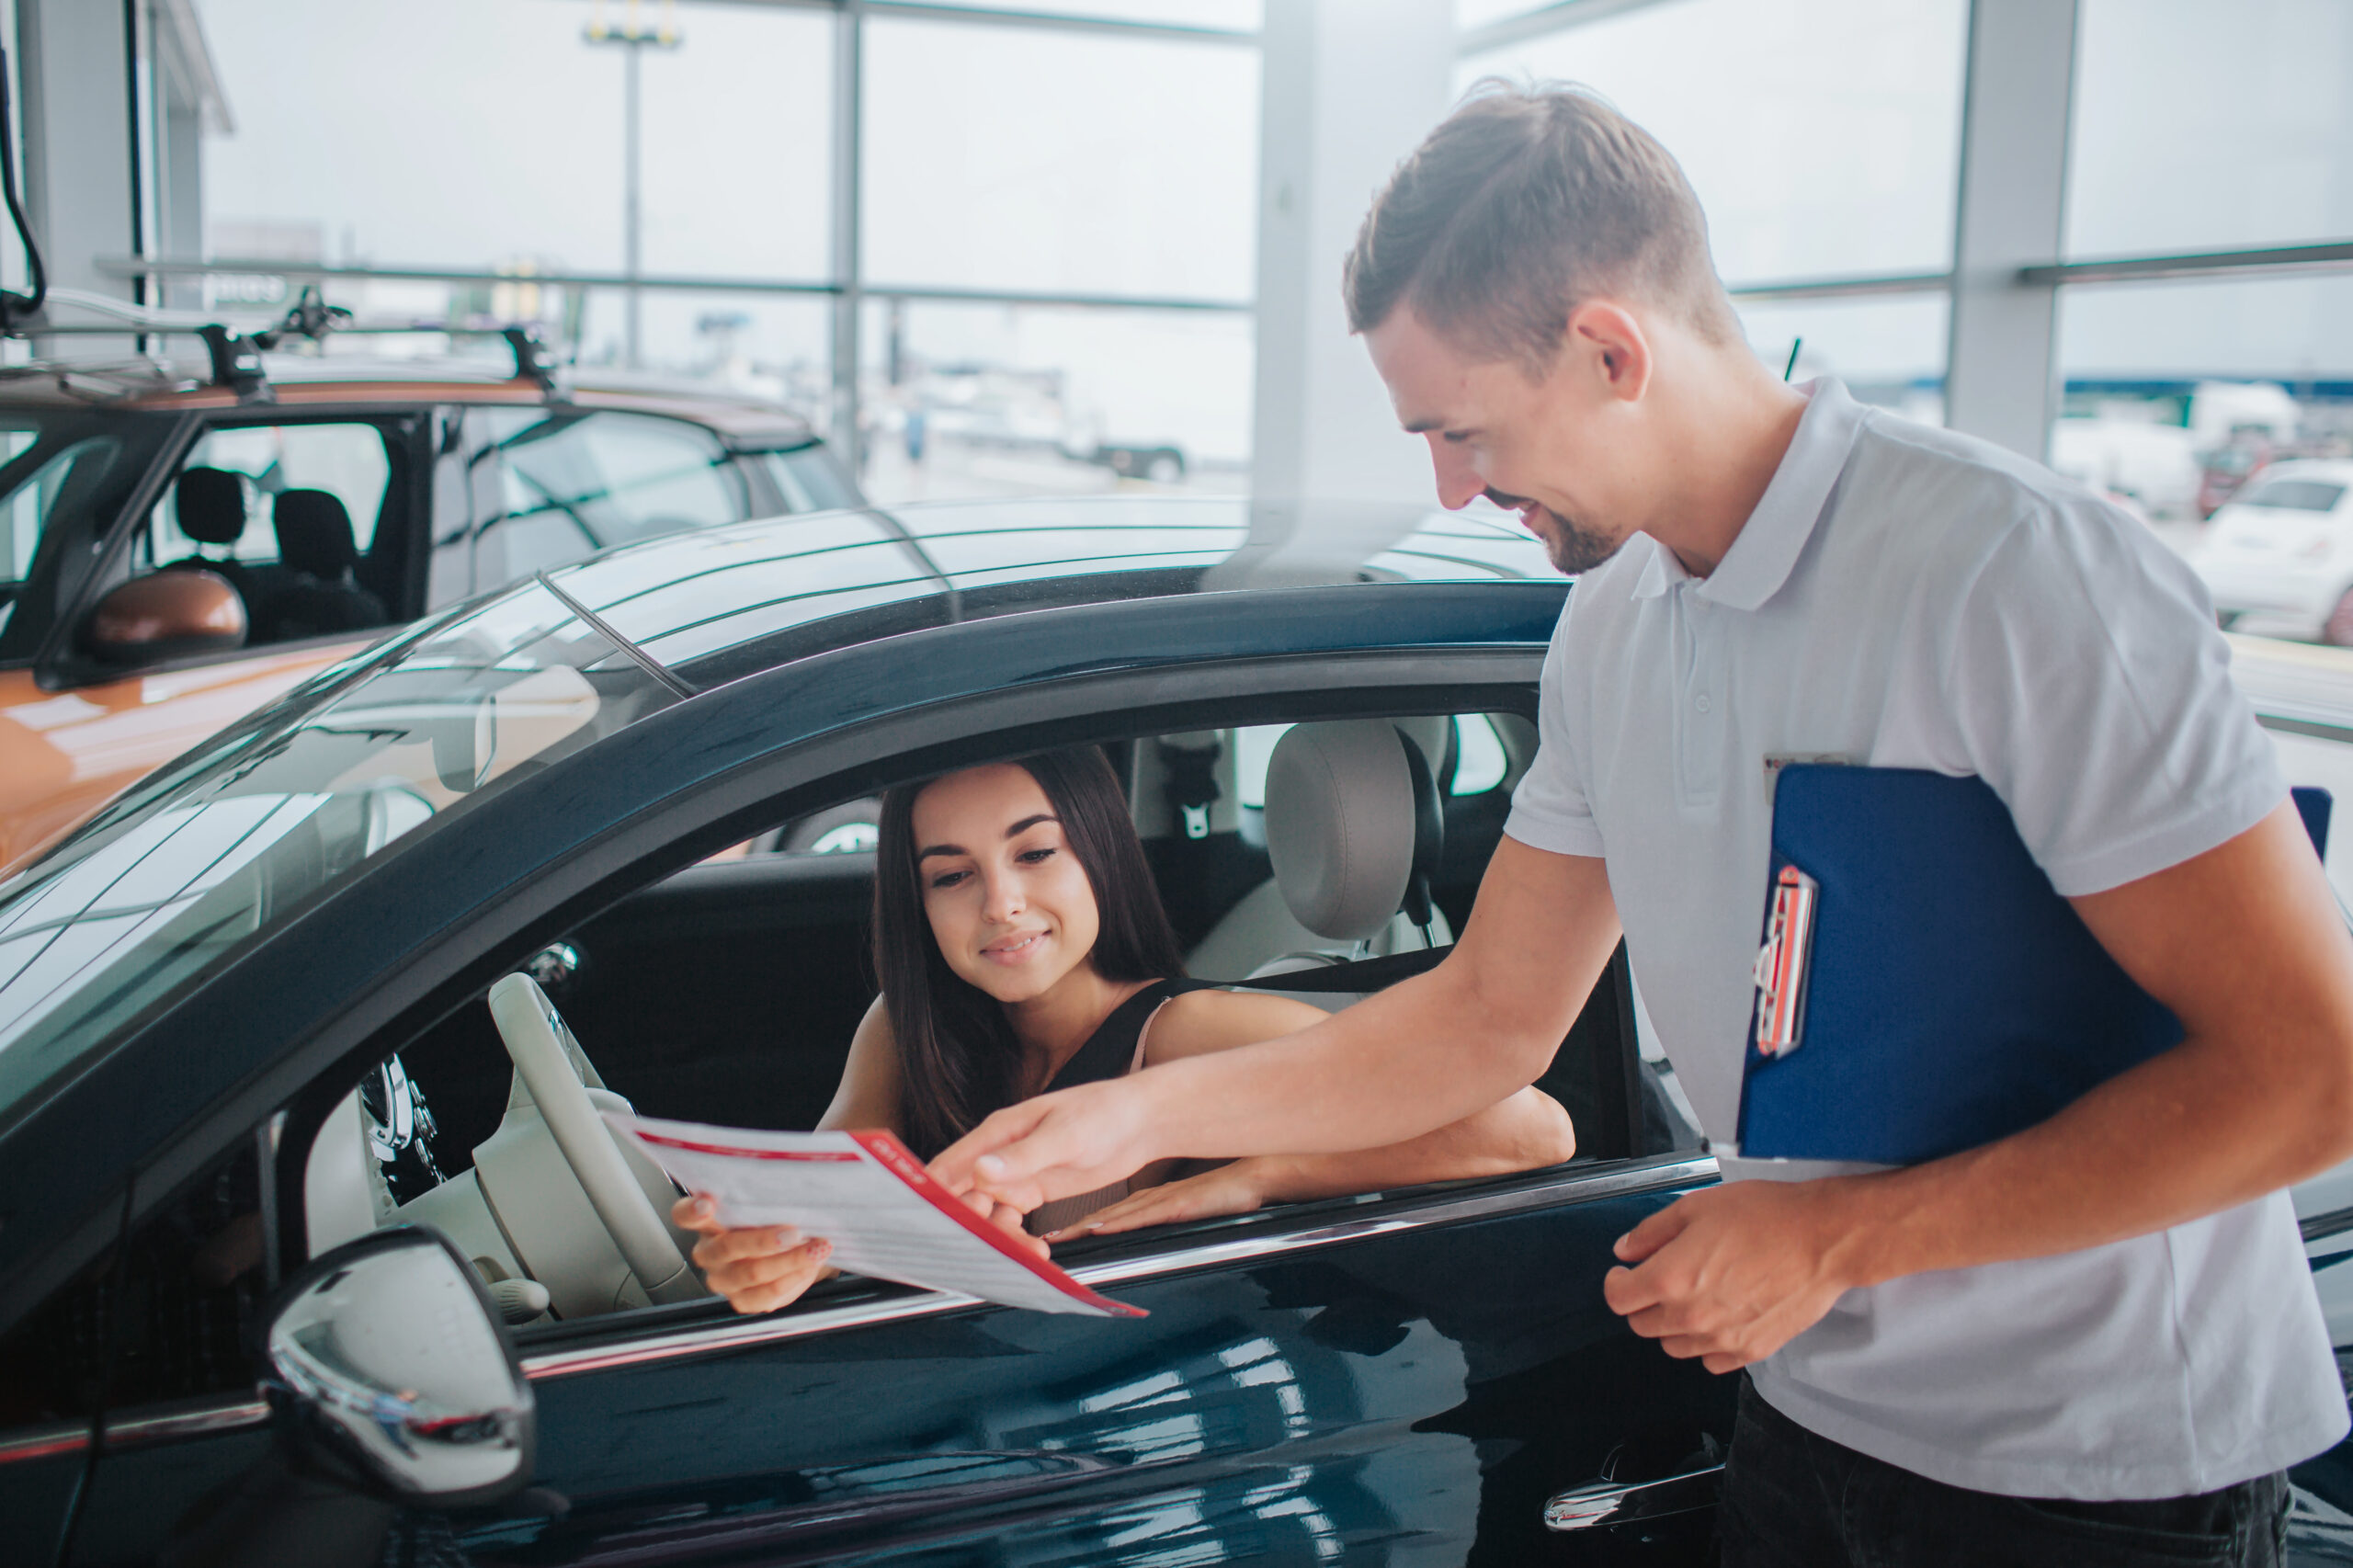 How to be a good service advisor